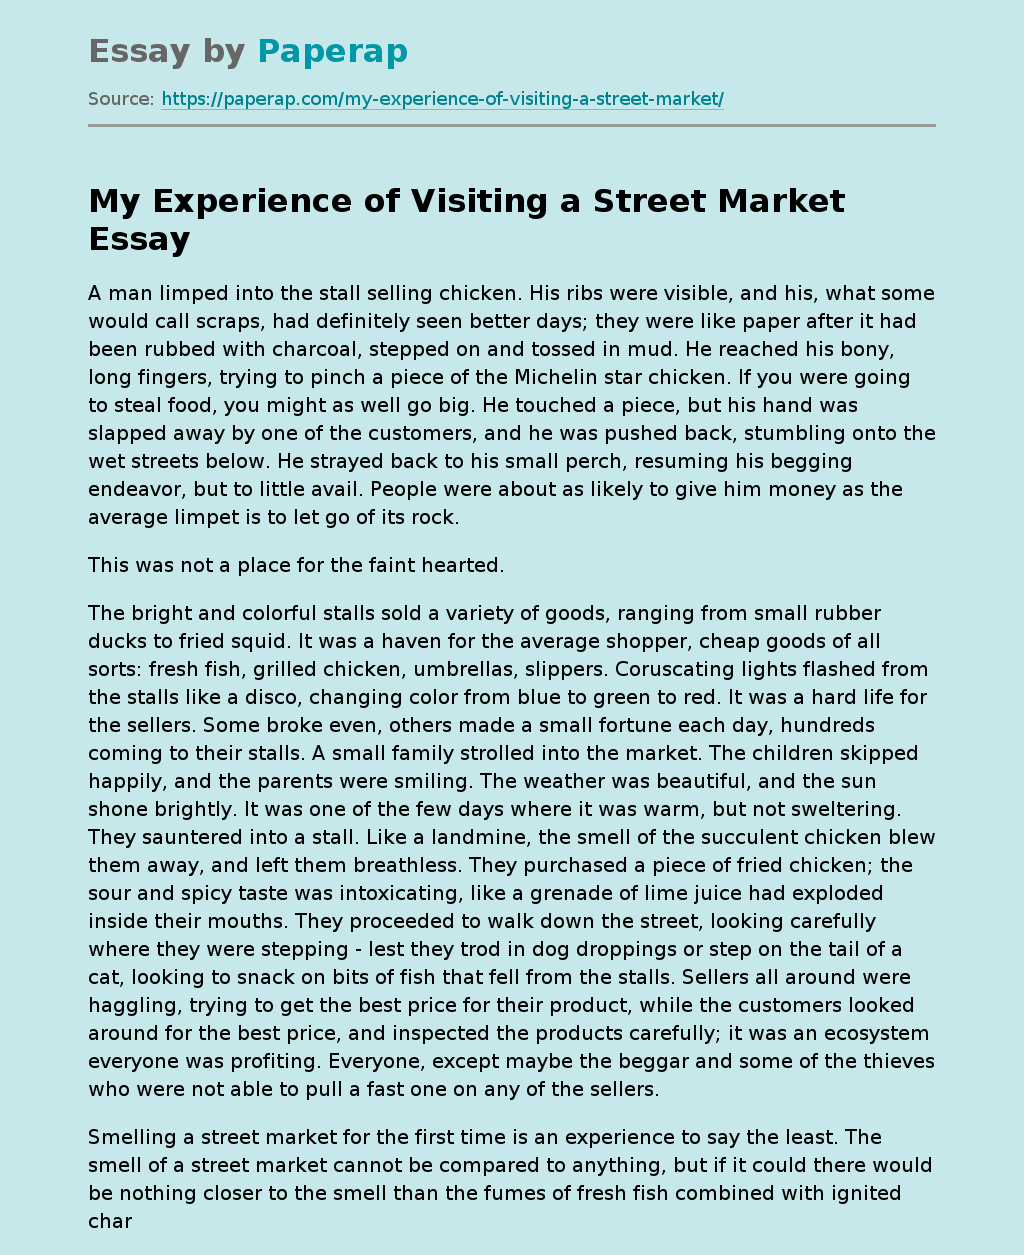 My Experience of Visiting a Street Market